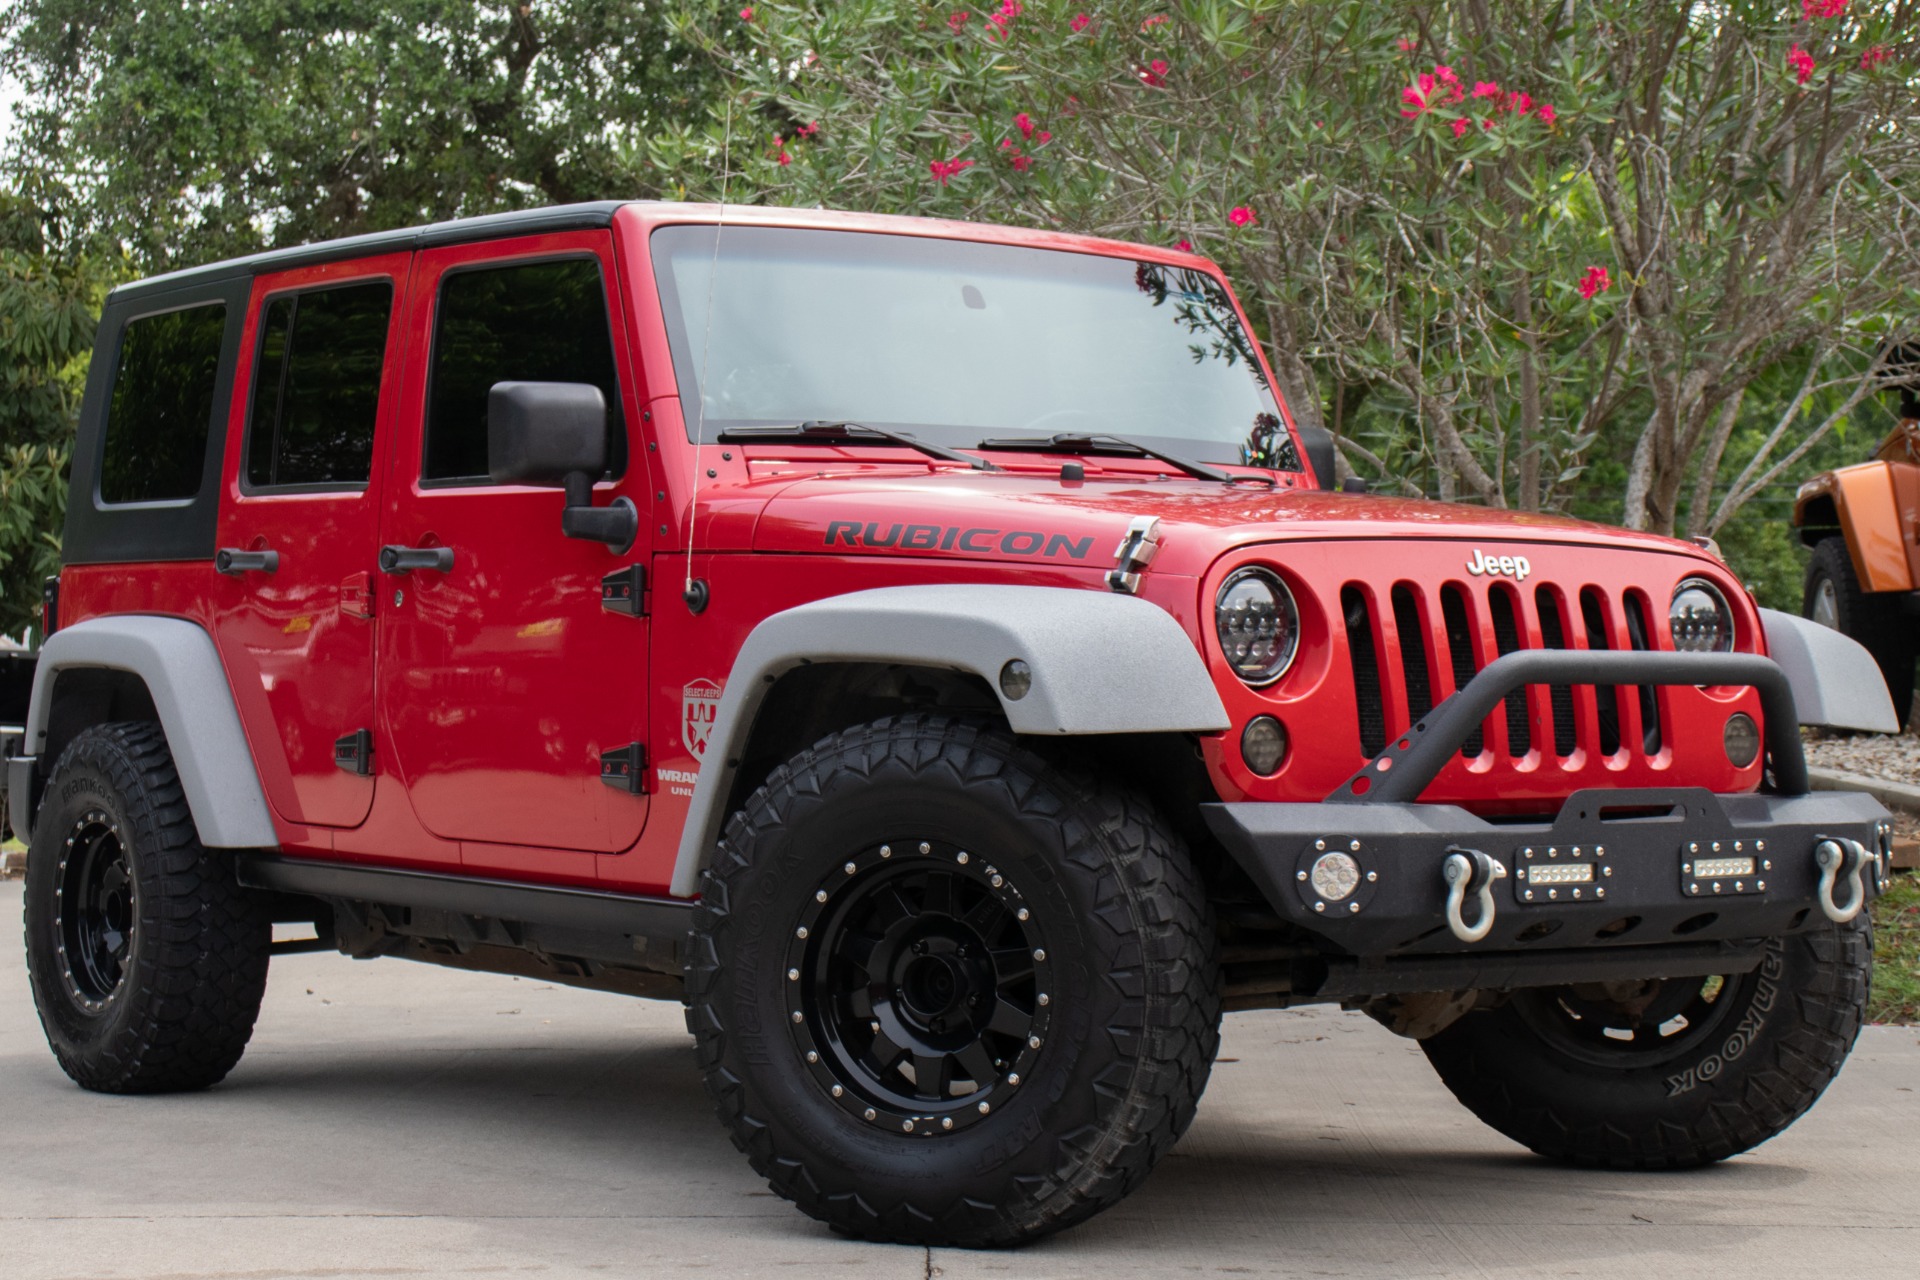 Used 2008 Jeep Wrangler Unlimited Rubicon For Sale ($18,995) | Select Jeeps  Inc. Stock #576299